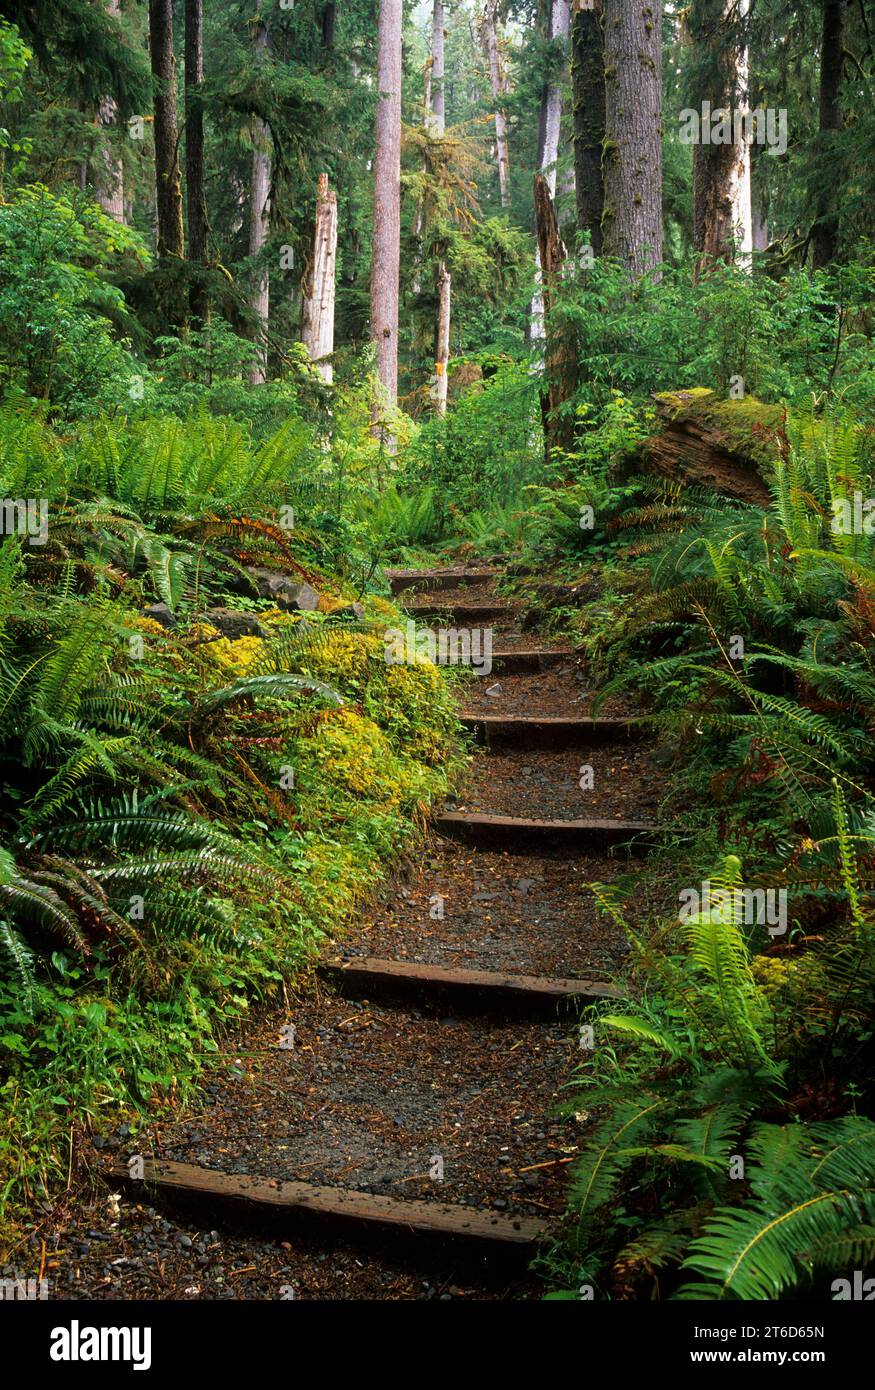 Hall of Mosses Trail, parc national olympique, Washington Banque D'Images